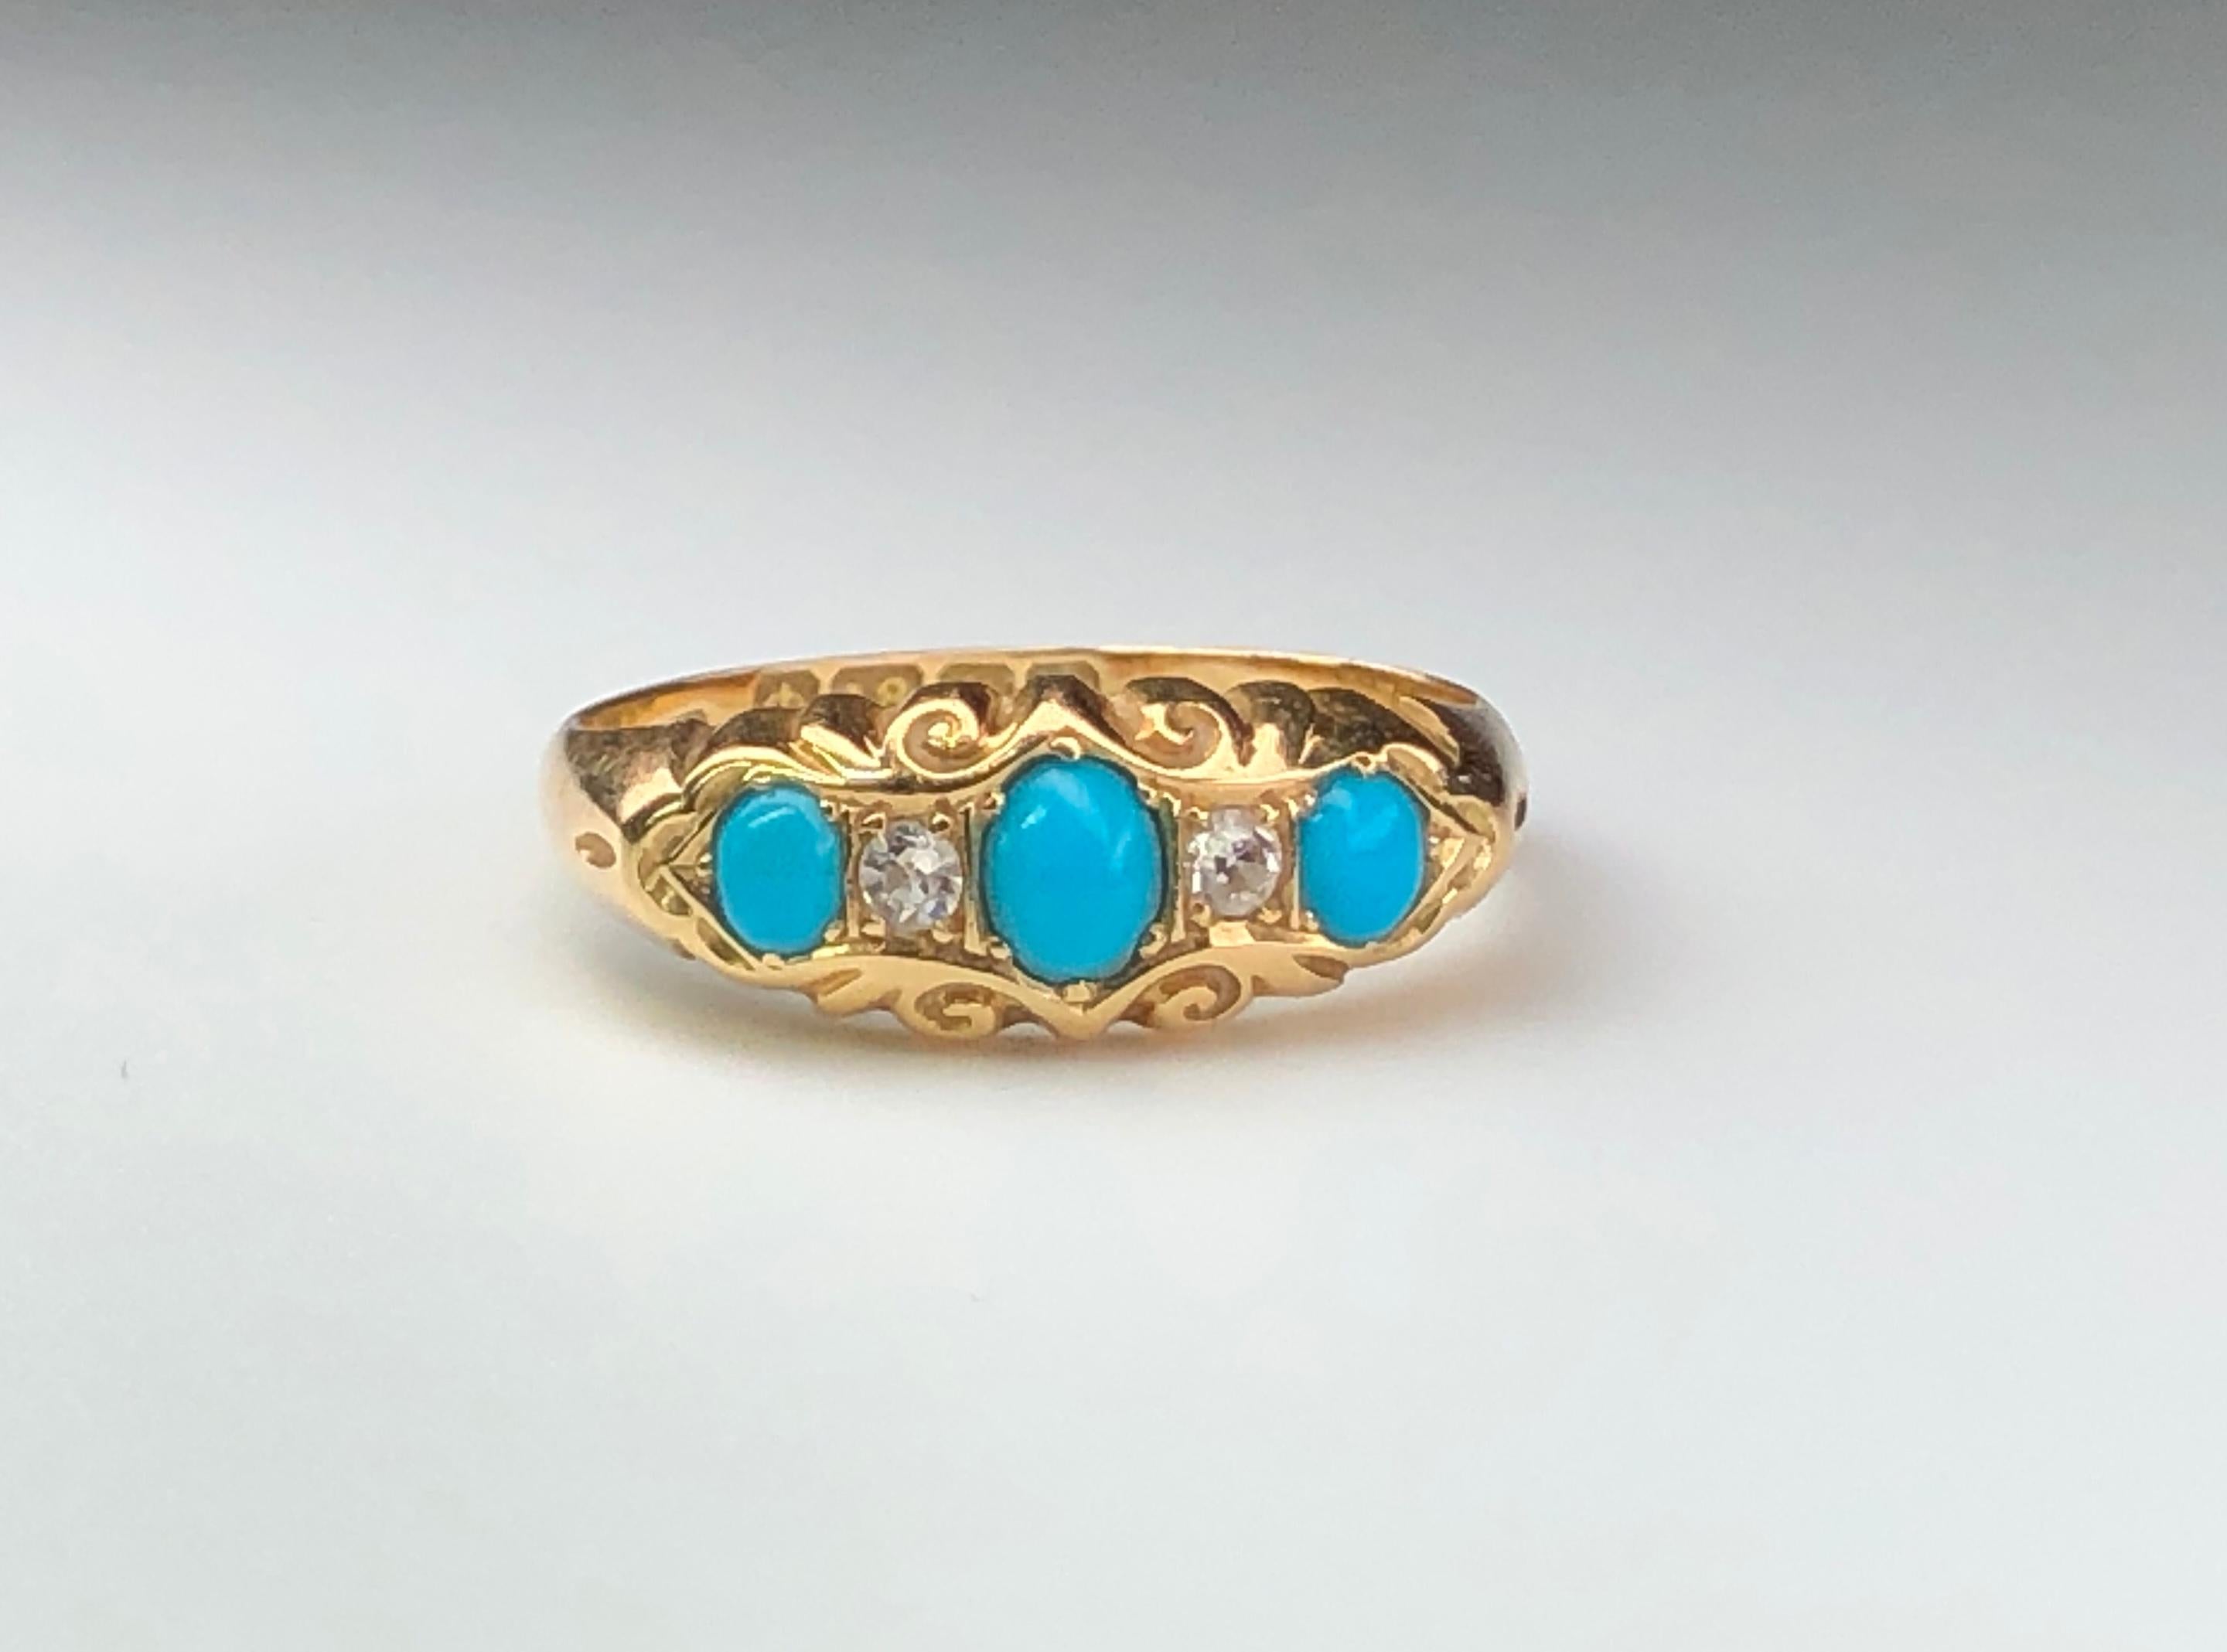 This striking antique turquoise and diamond ring features three cabochon turquoise and two diamonds to the head, setting in 18K Gold.

This ring is an antique example dated to Birmingham 1915.

Turquoise is the birthstone for December and is thought